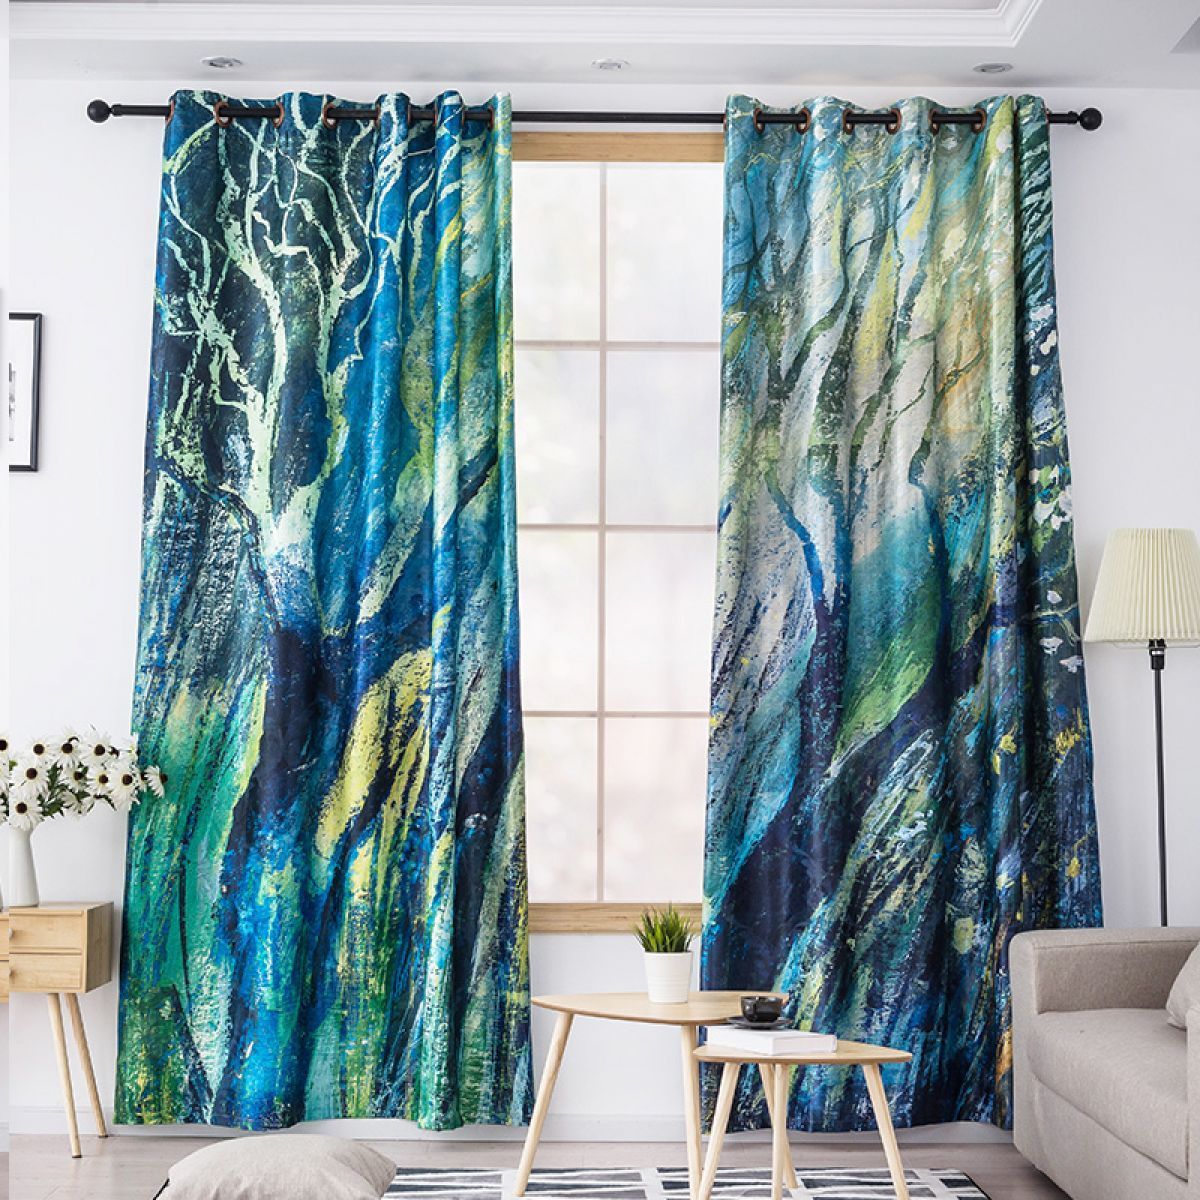 Oil Painting Of The Forest Printed Window Curtain Home Decor